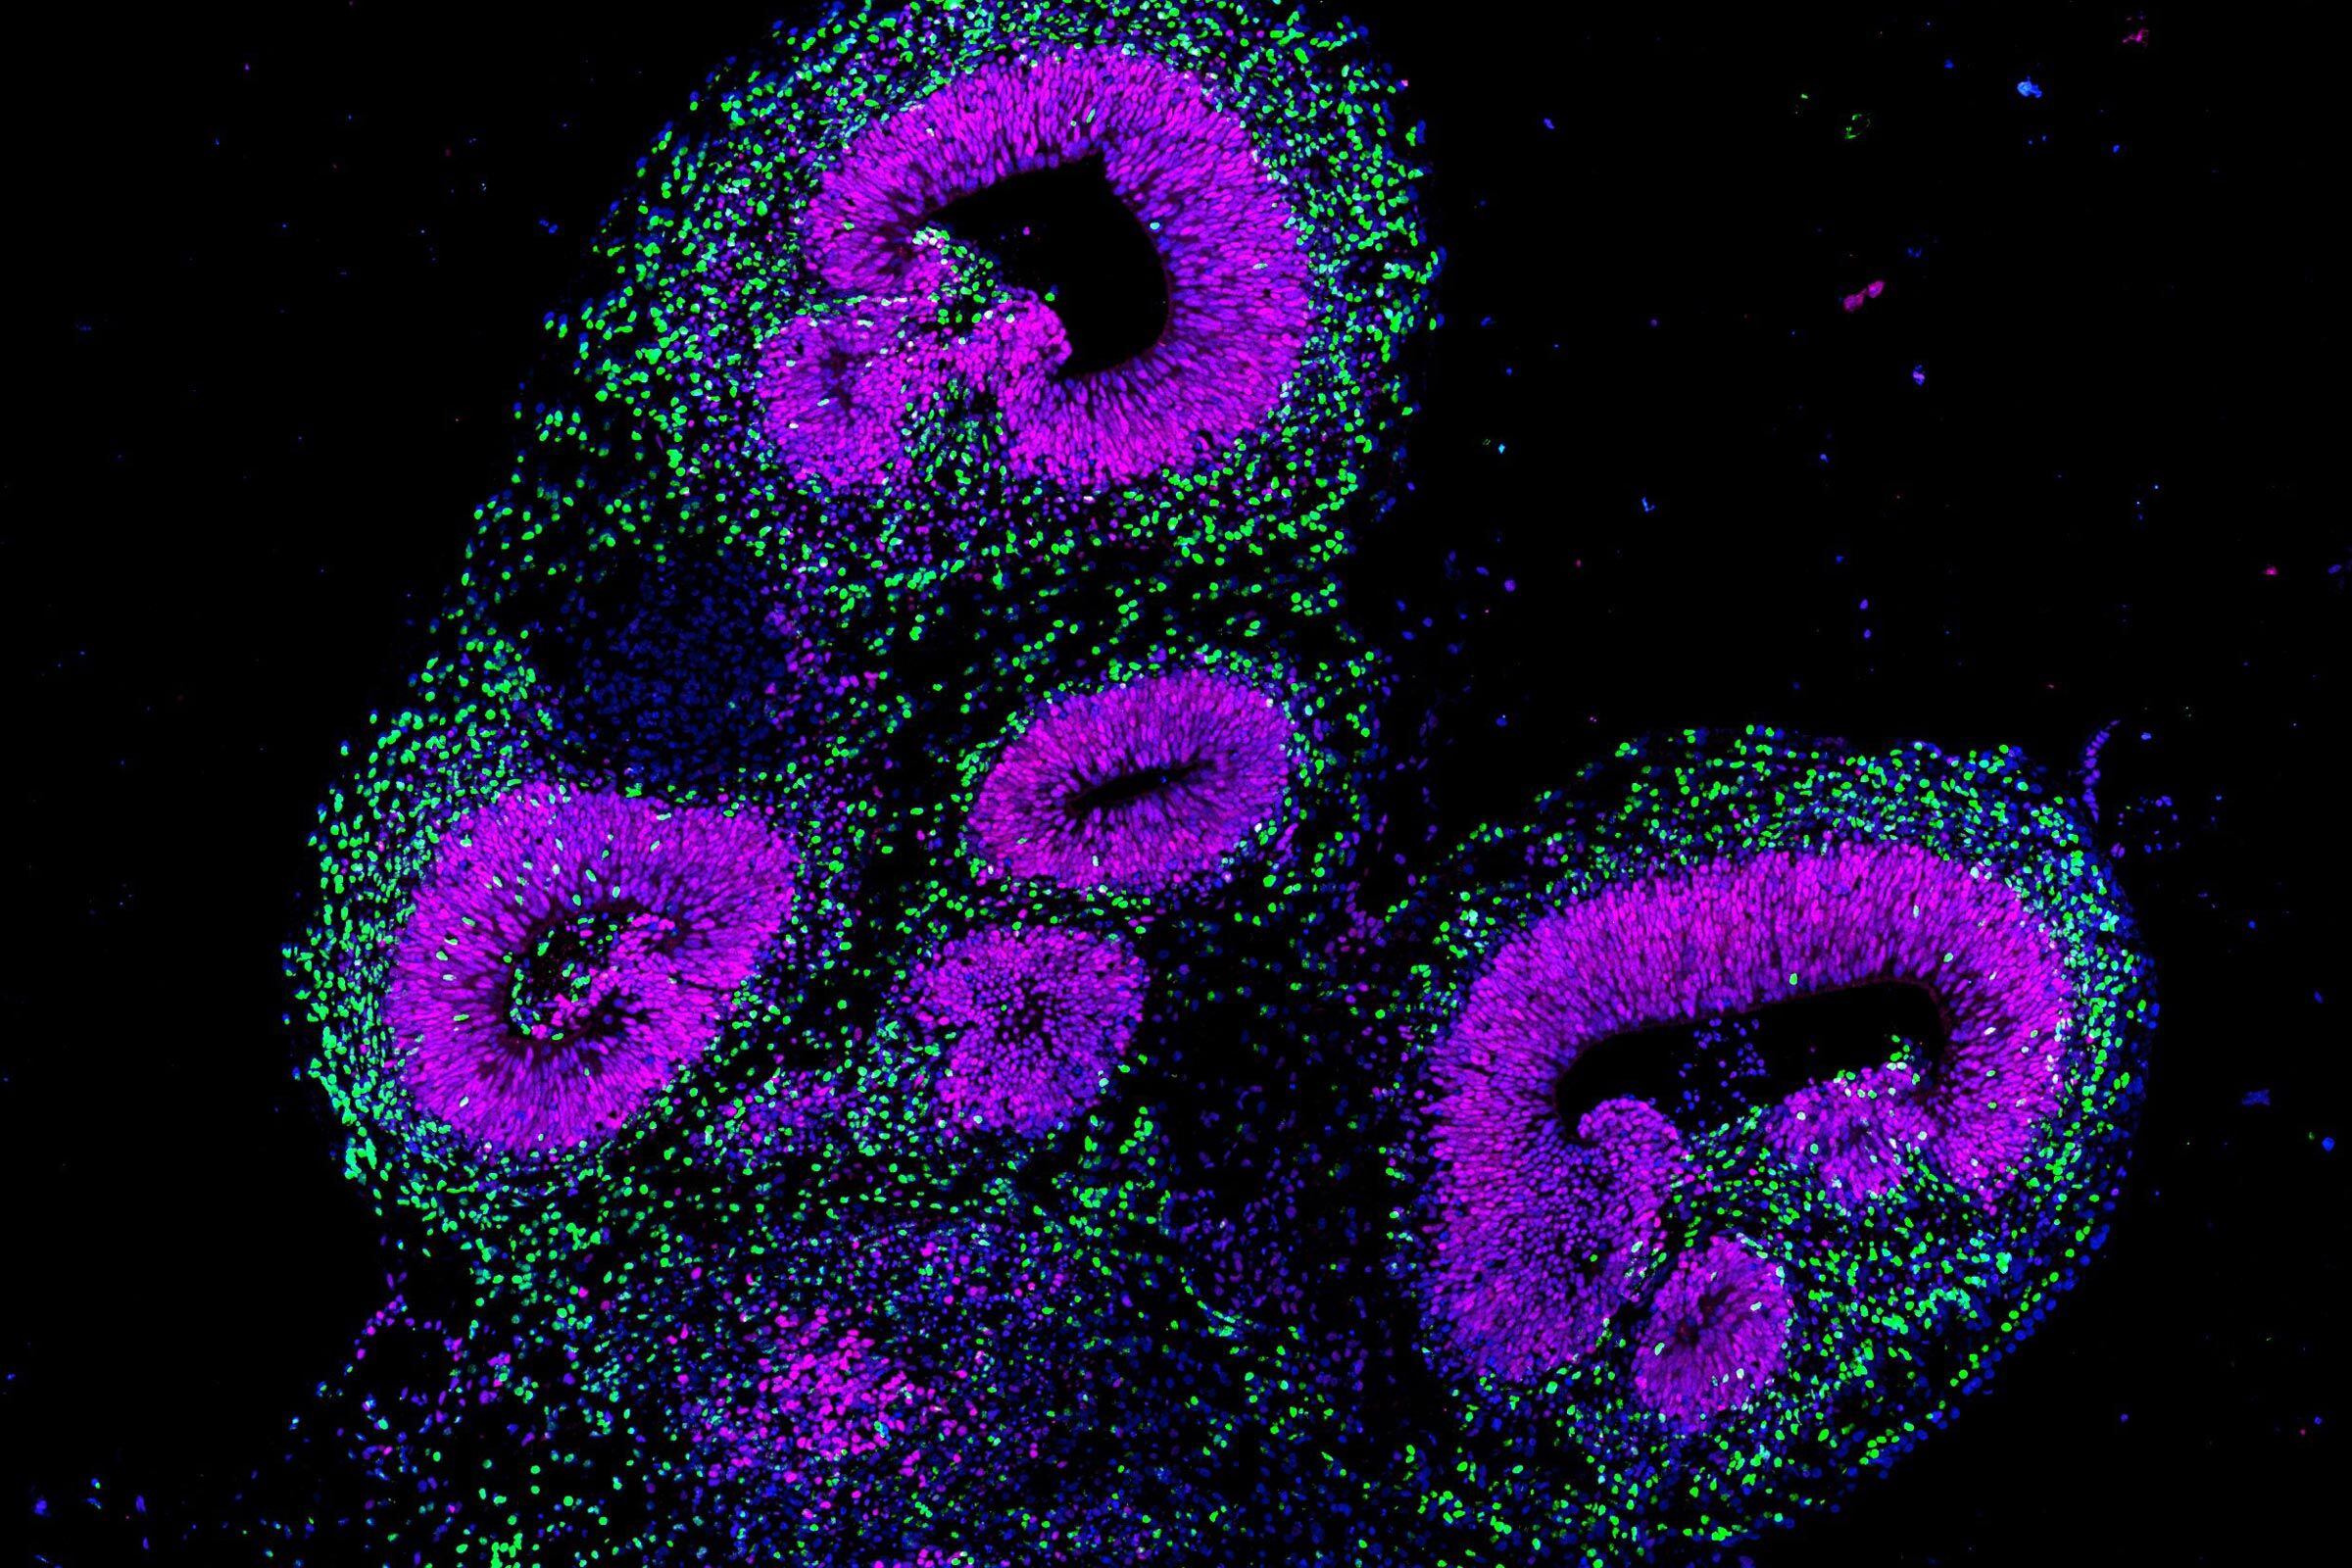 Brain organoid from human stem cells under the fluorescence microscope: the protein GLI3 is stained purple and marks neuronal precursor cells in forebrain regions of the organoid. Neurons are stained green.CREDITPhotograph: F. Sanchís Calleja, A. Jain, P. Wahle / ETH Zurich